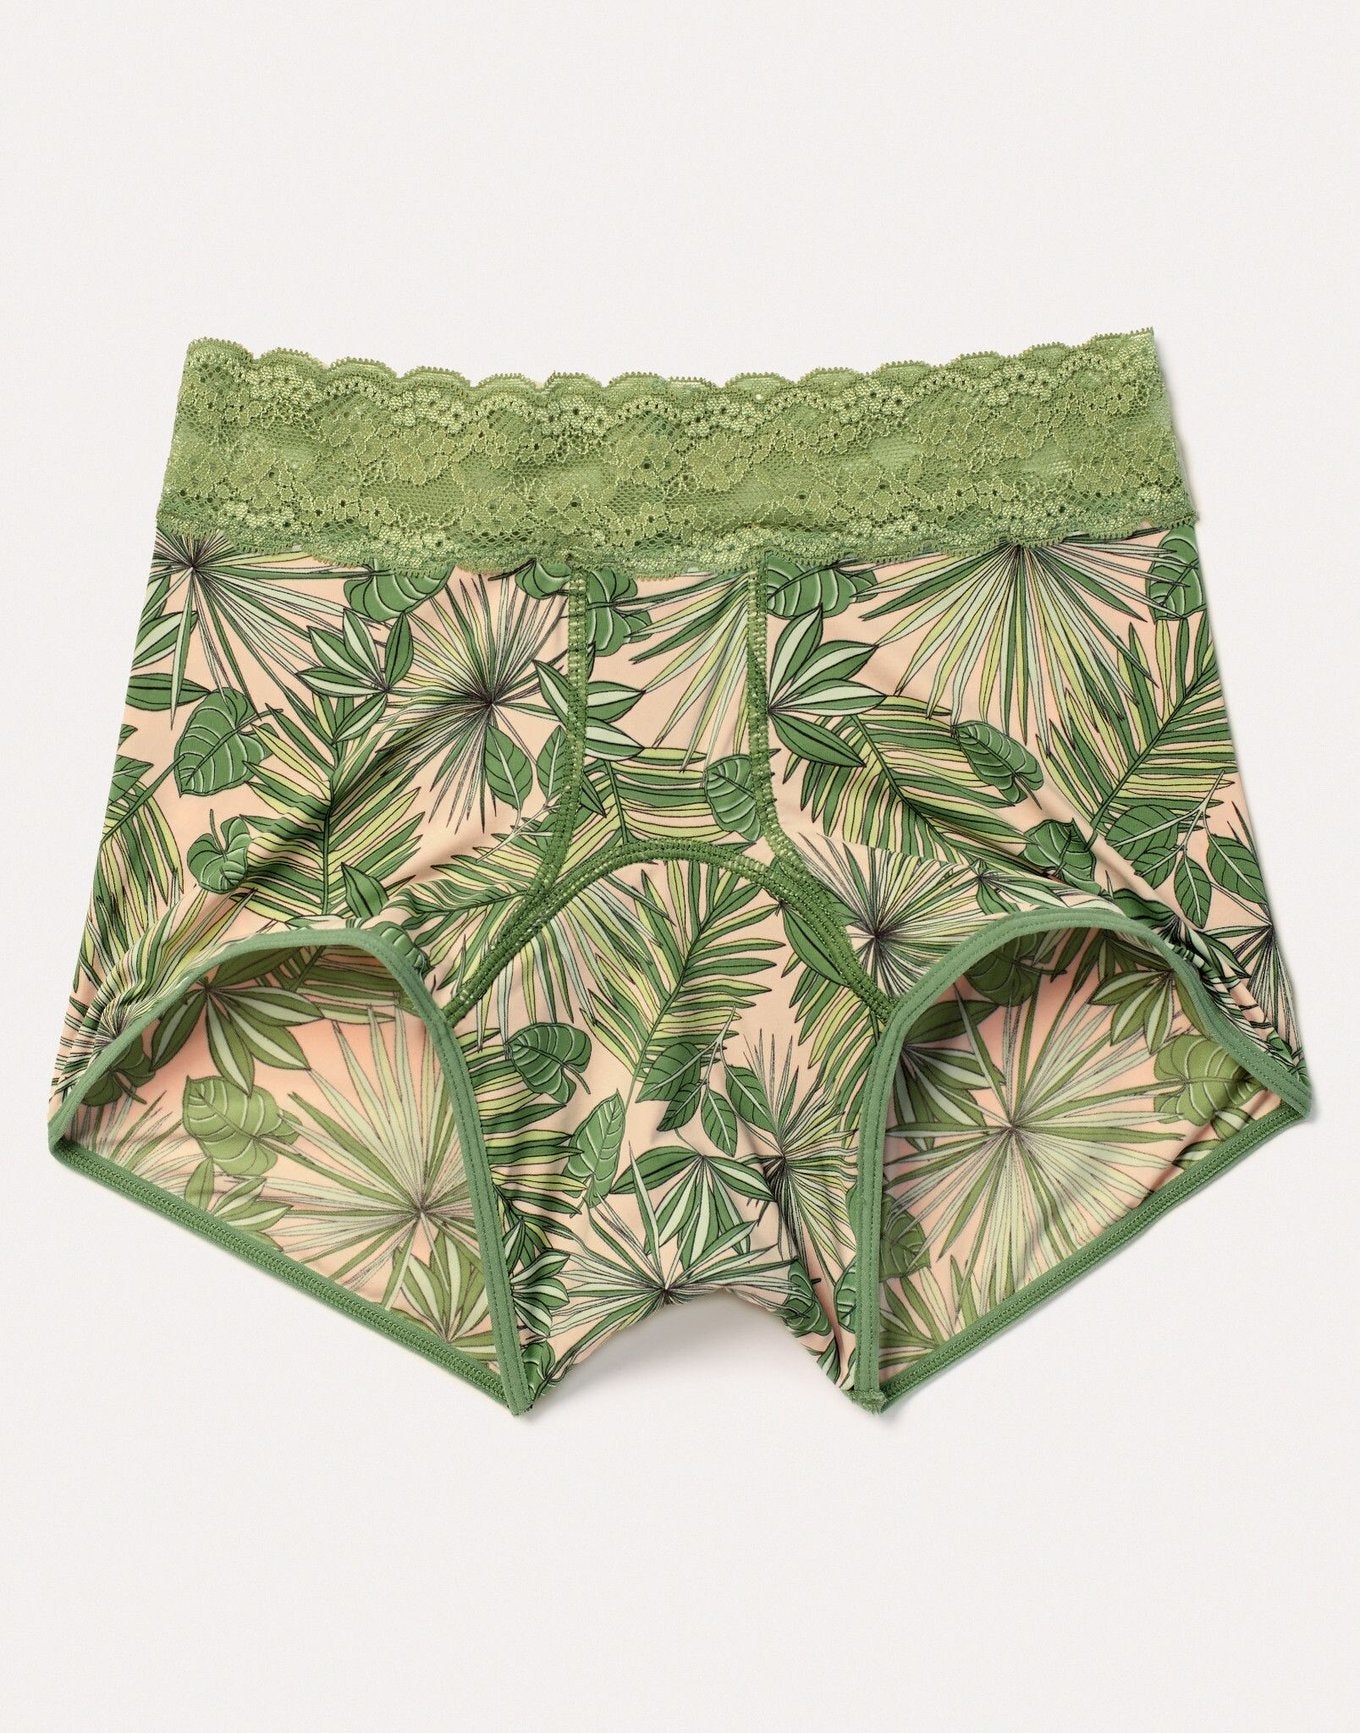 Joyja Emily period-proof panty in color Breezy Palms  and shape shortie